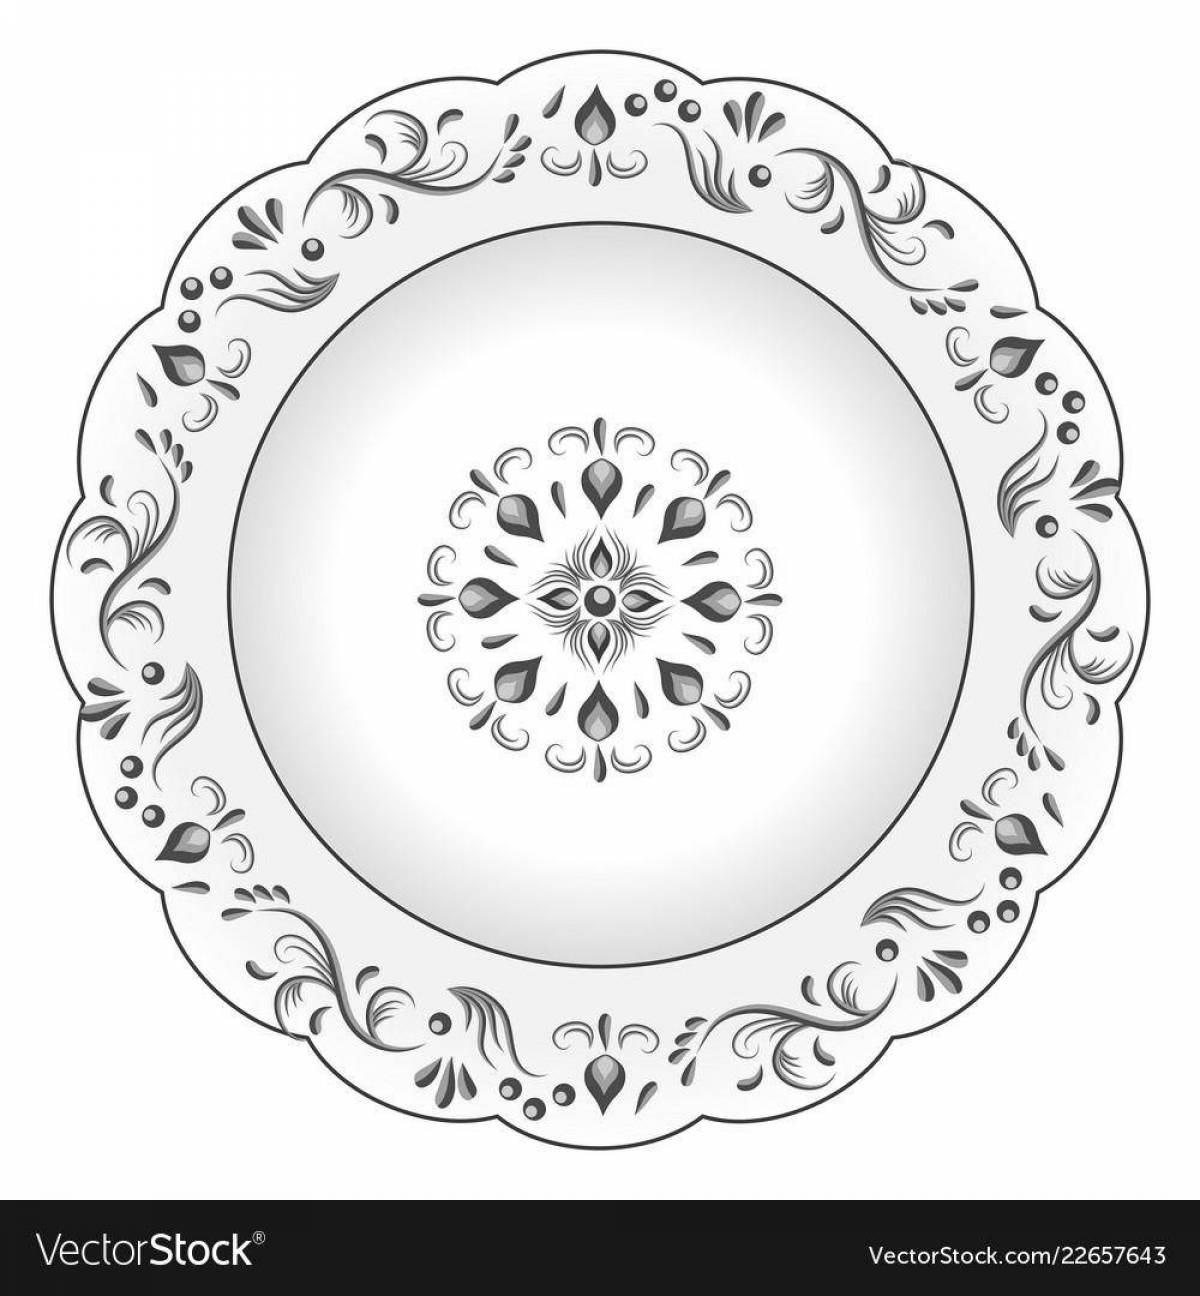 Coloring book cheerful Gzhel plate